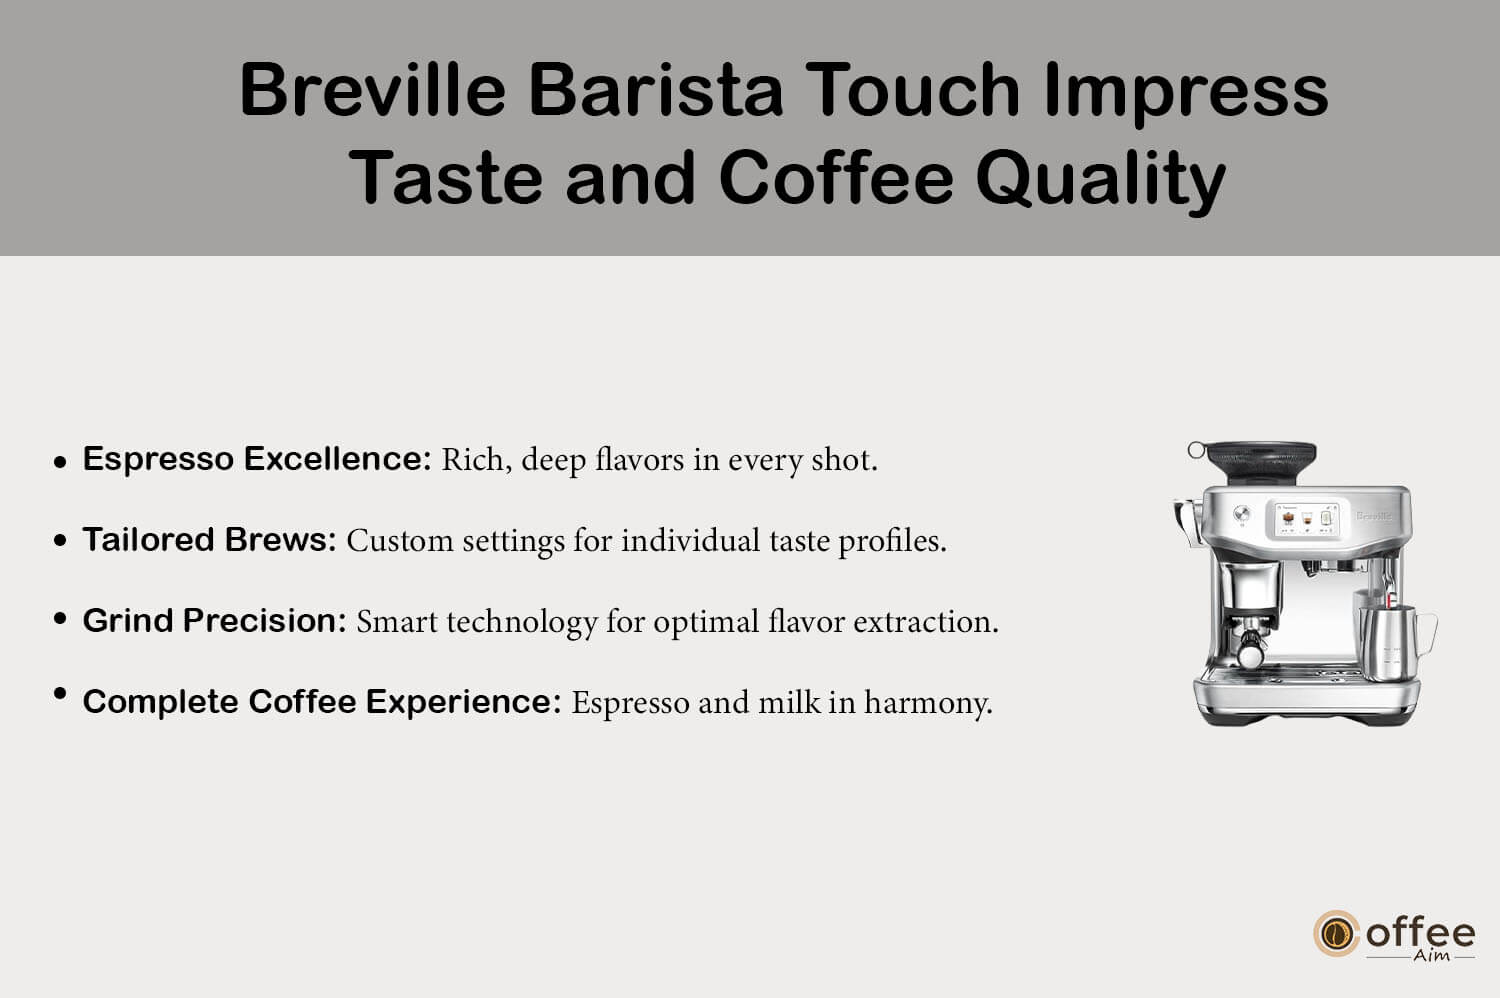 "This graphic highlights the flavor and coffee excellence of the 'Breville Barista Touch Impress', as elaborated in our 'Breville Barista Touch Impress Review'."